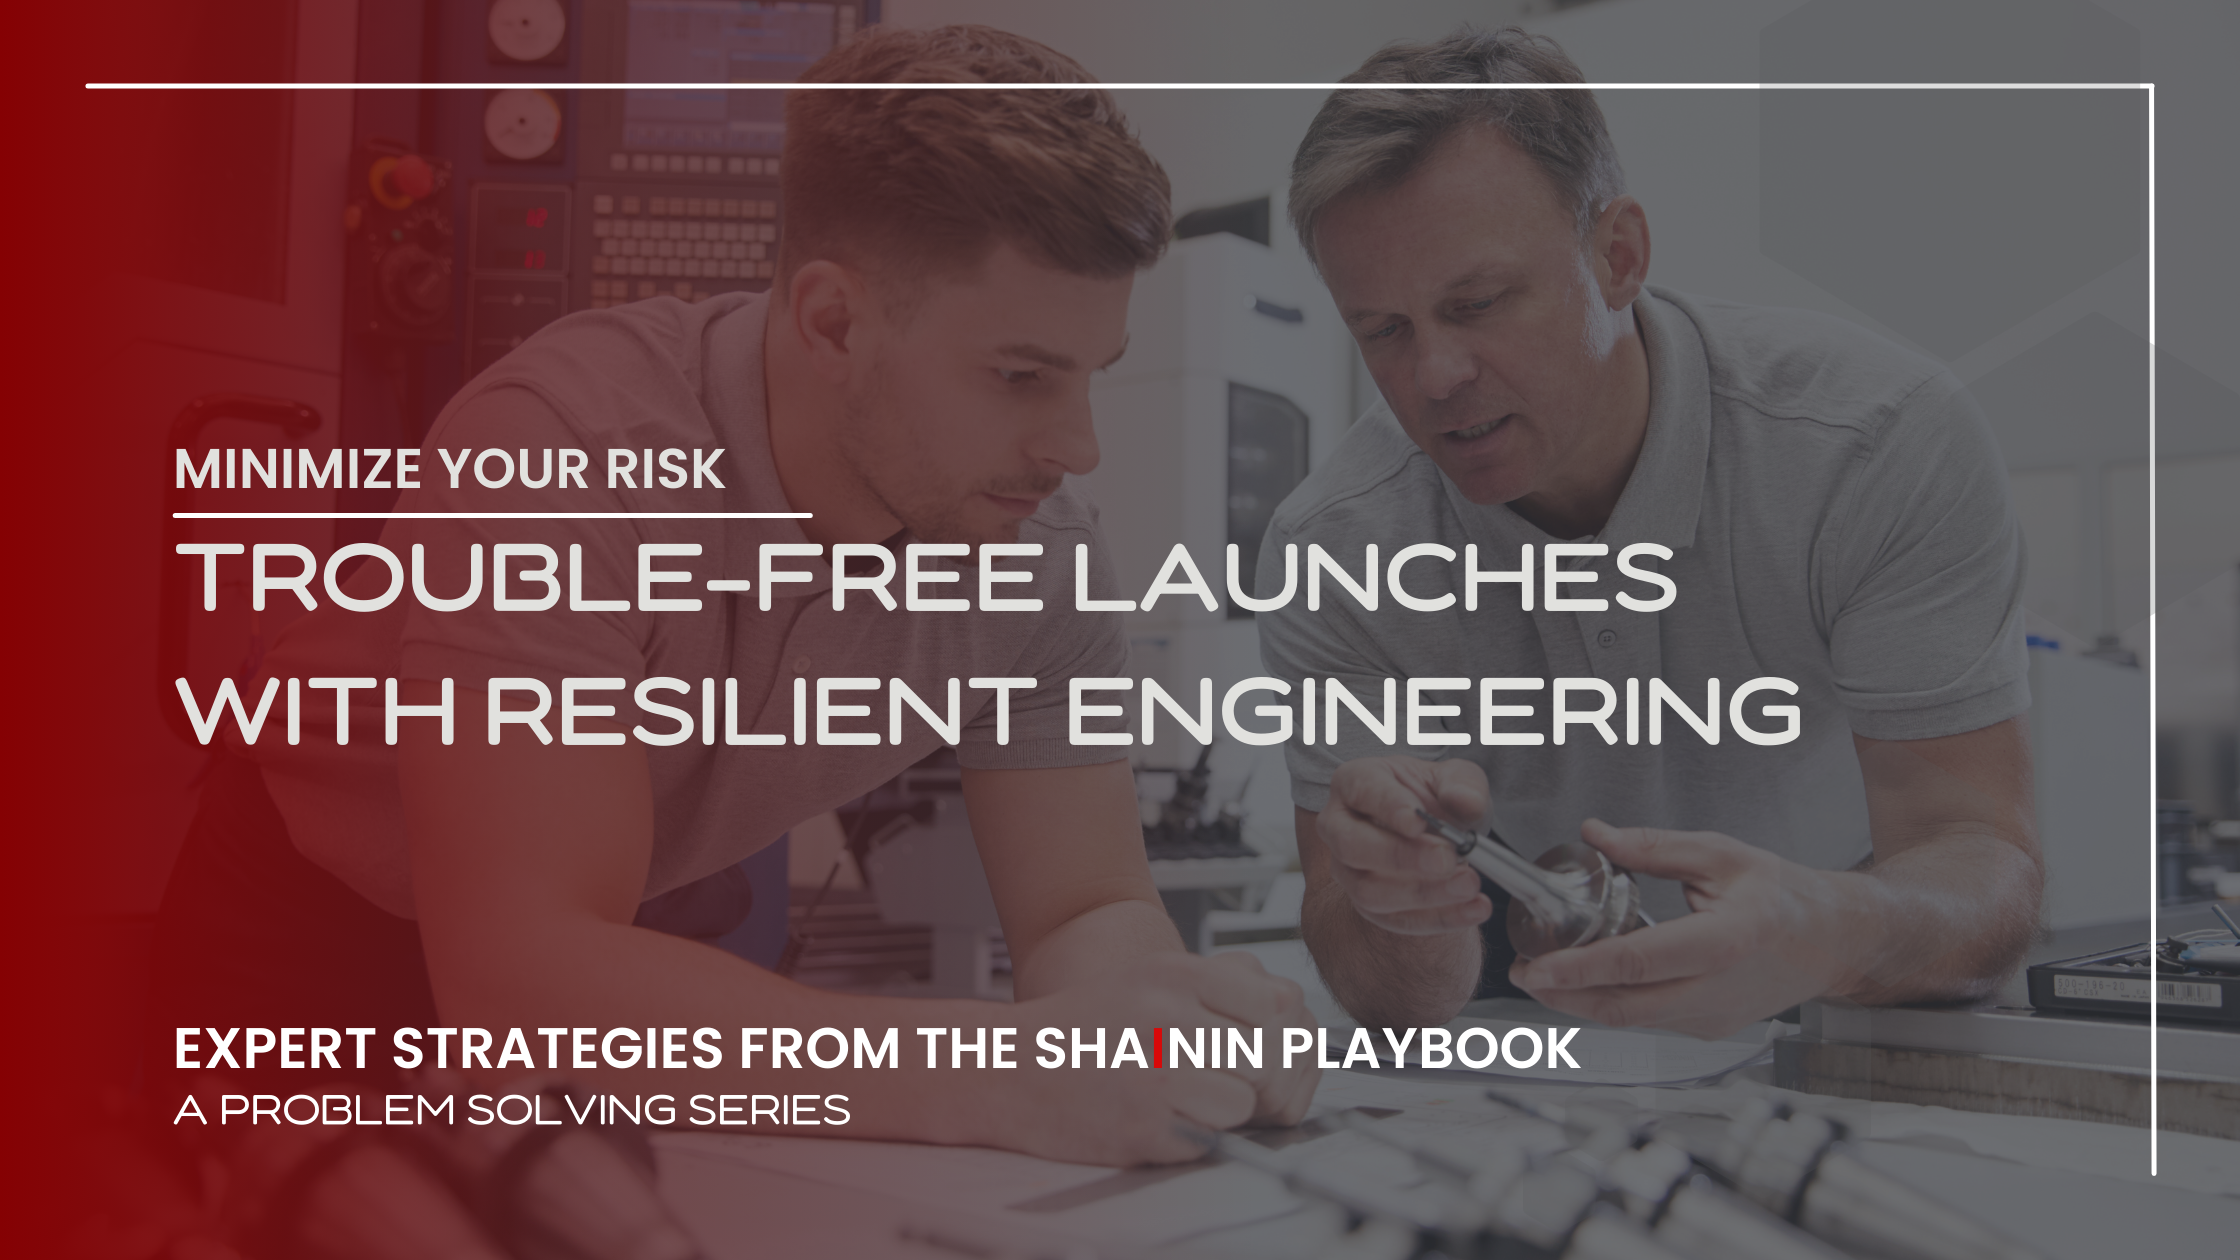 Header image for Trouble-free Launches with Resilient Engineering - featuring two engineers having a discussion in a facility